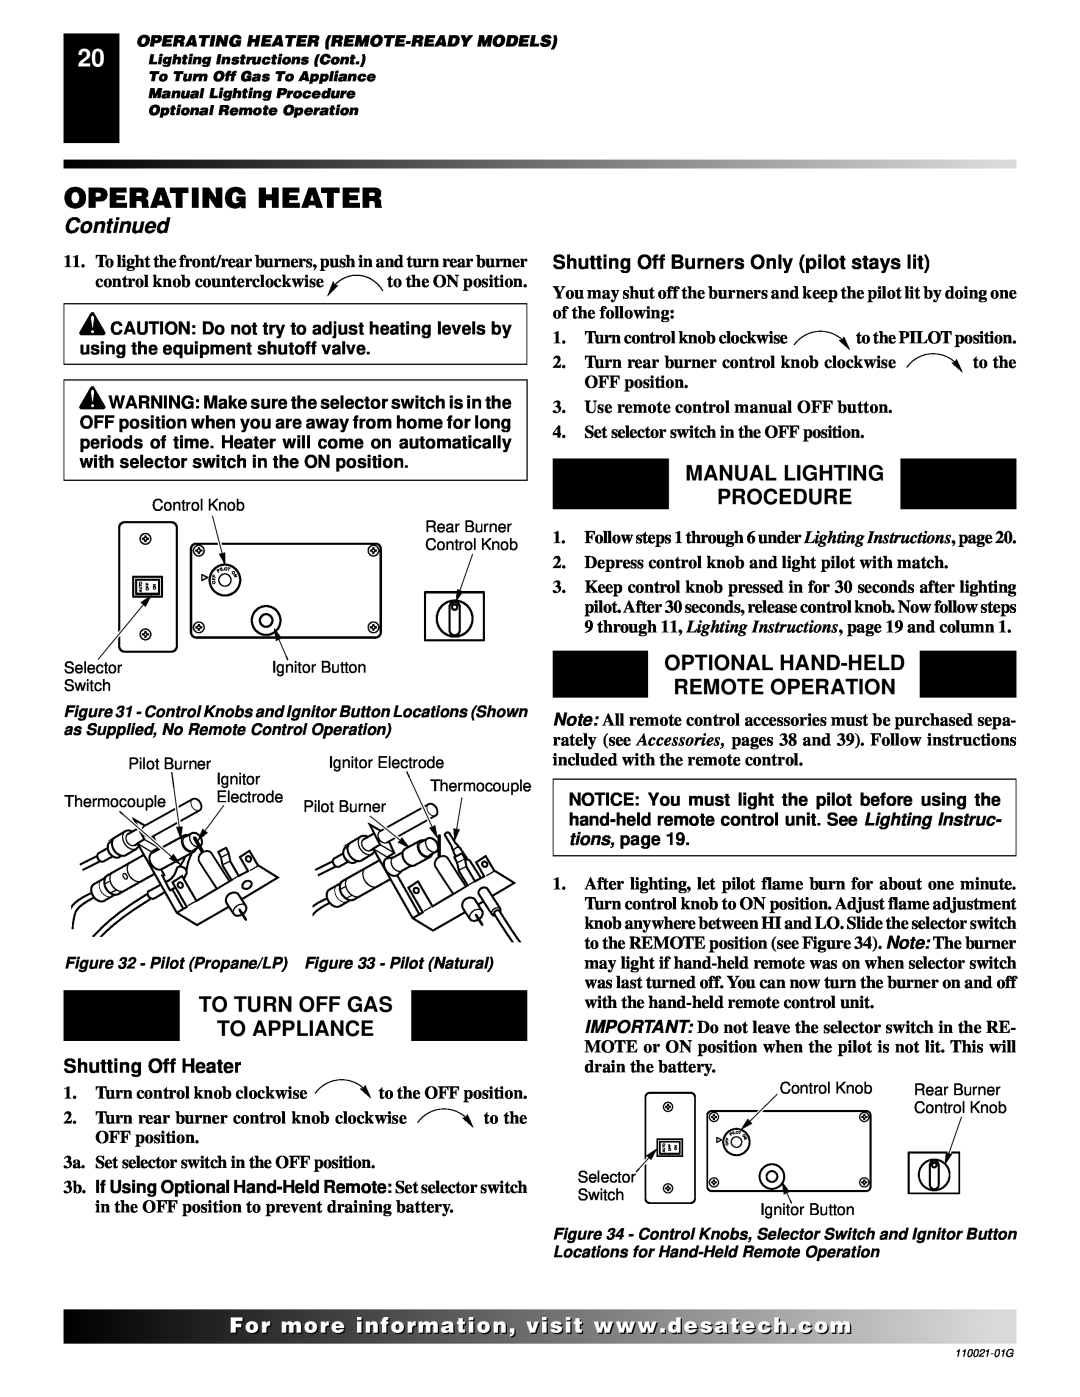 Desa CSG3930PR, CSG3930NR Optional Hand-Held Remote Operation, Operating Heater, Continued, To Turn Off Gas To Appliance 